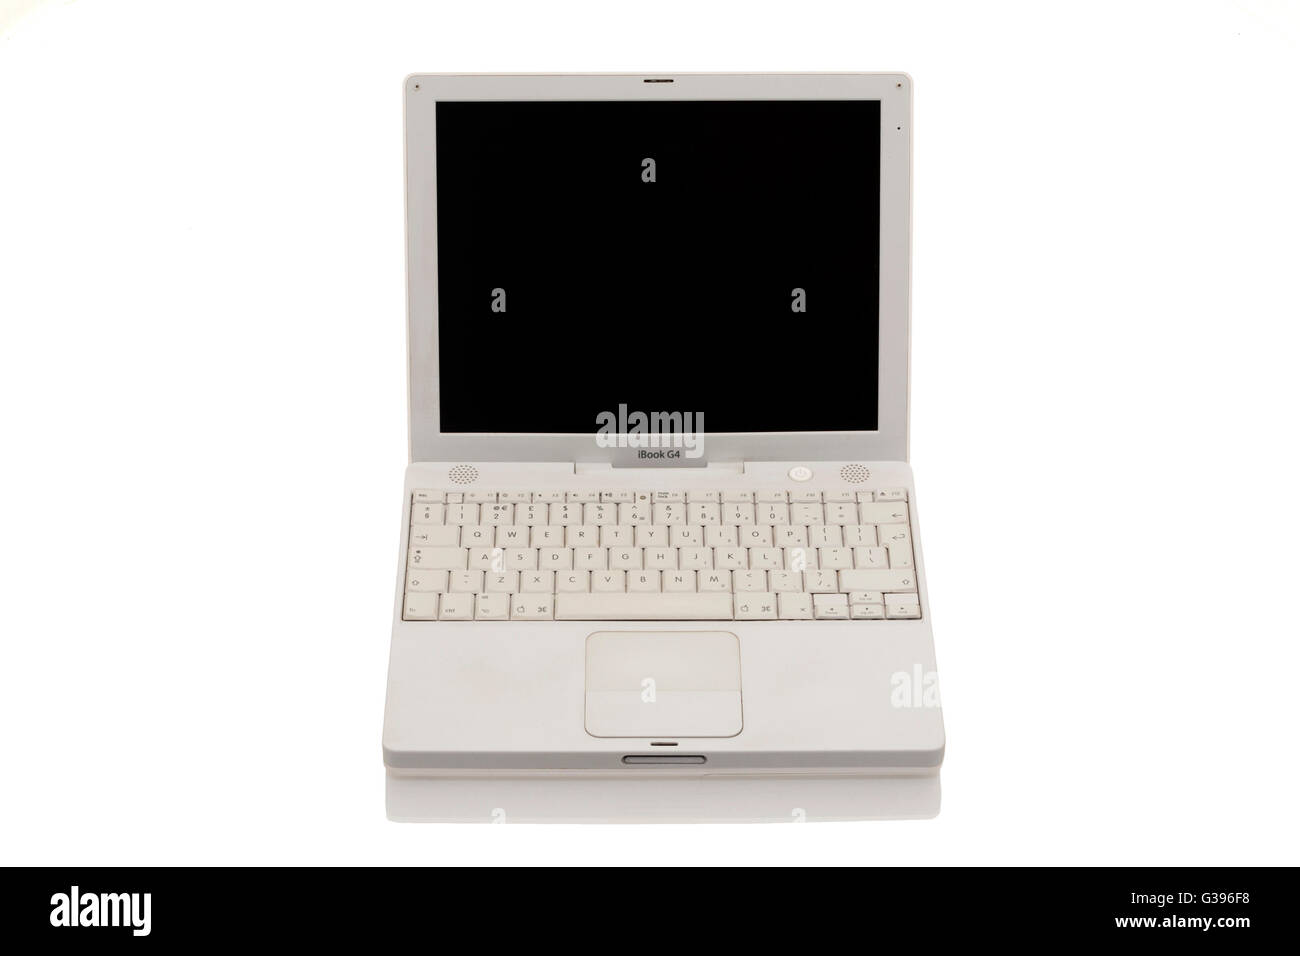 Apple iBook G4 laptop / lap top computer with scrolling TrackPad / trackpad / track pad, blank screen & keyboard. Stock Photo